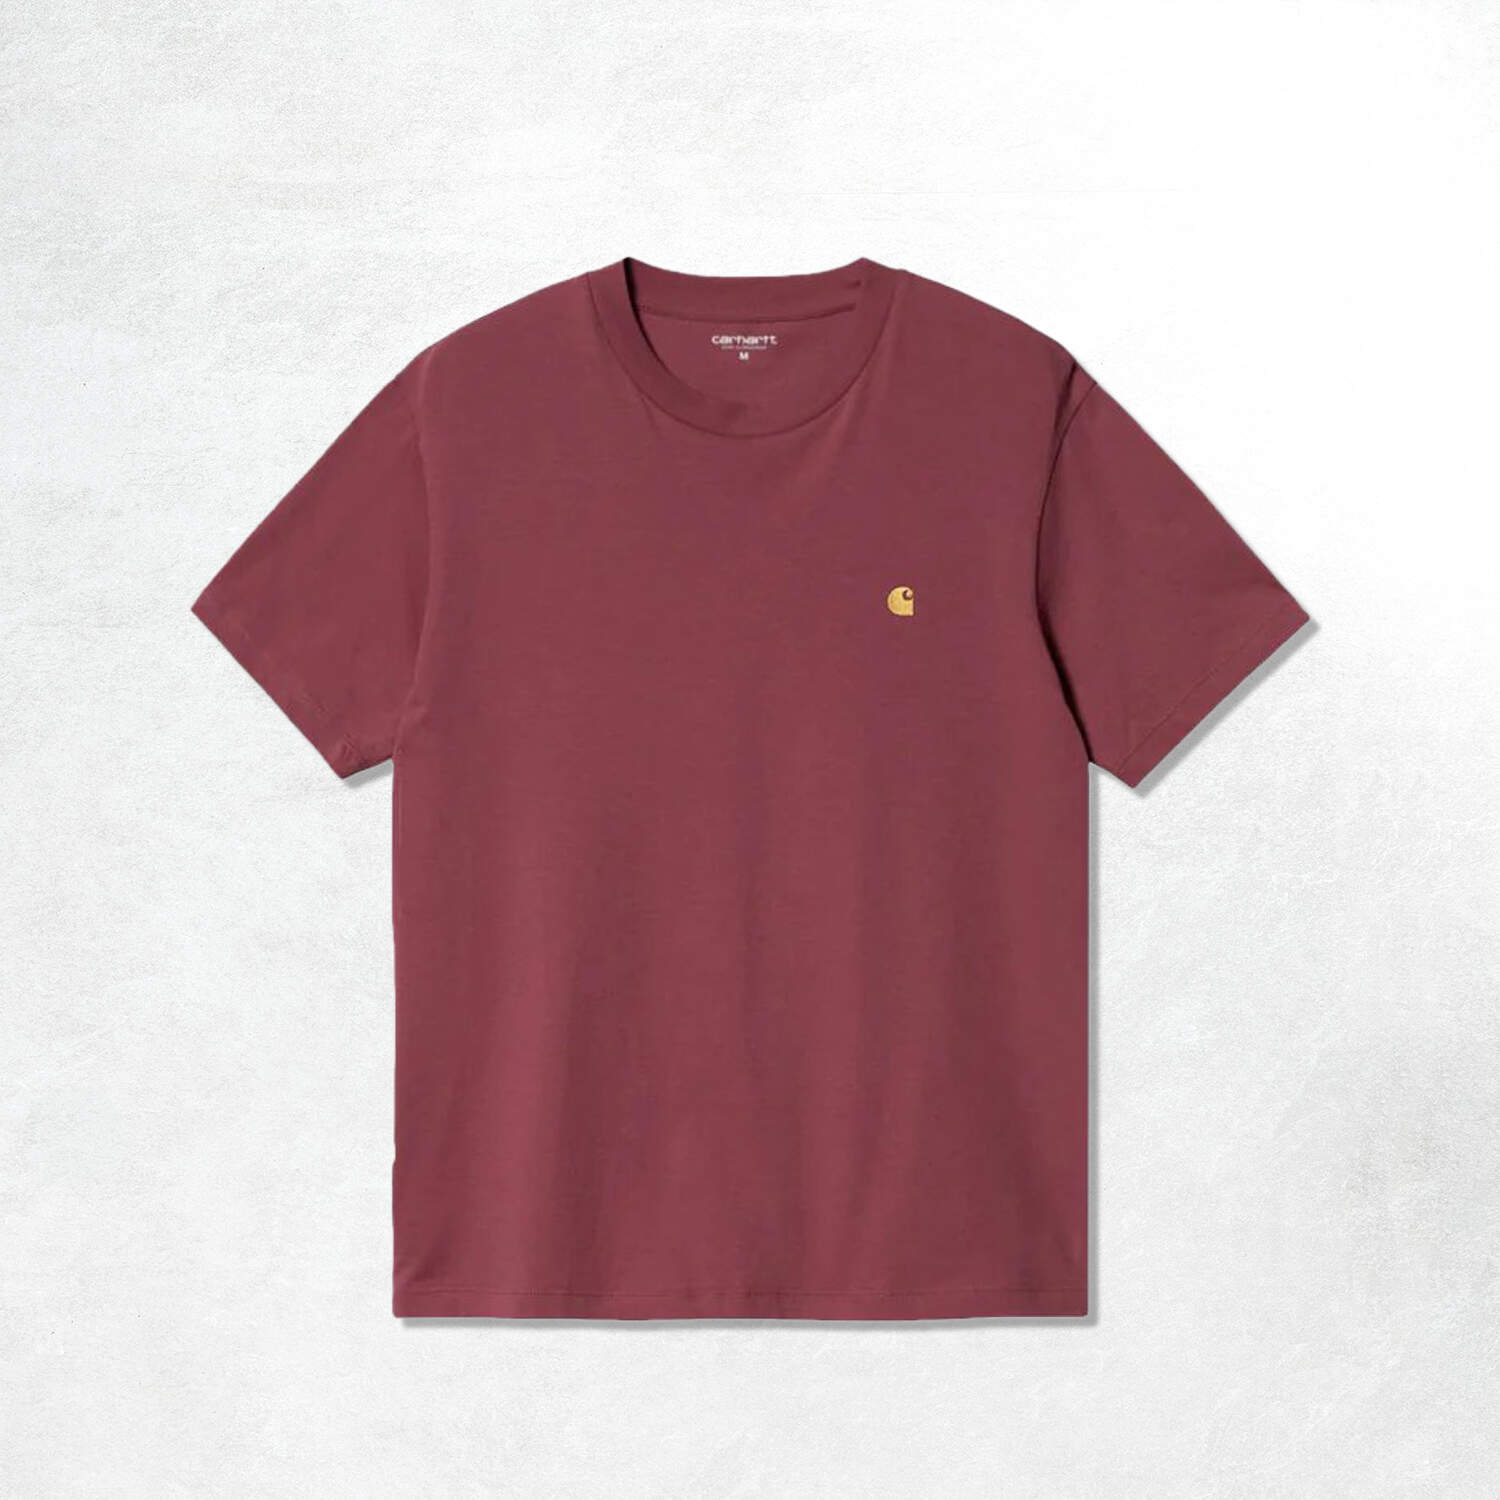 Carhartt WIP S/S Chase T-Shirt: Punch/Gold